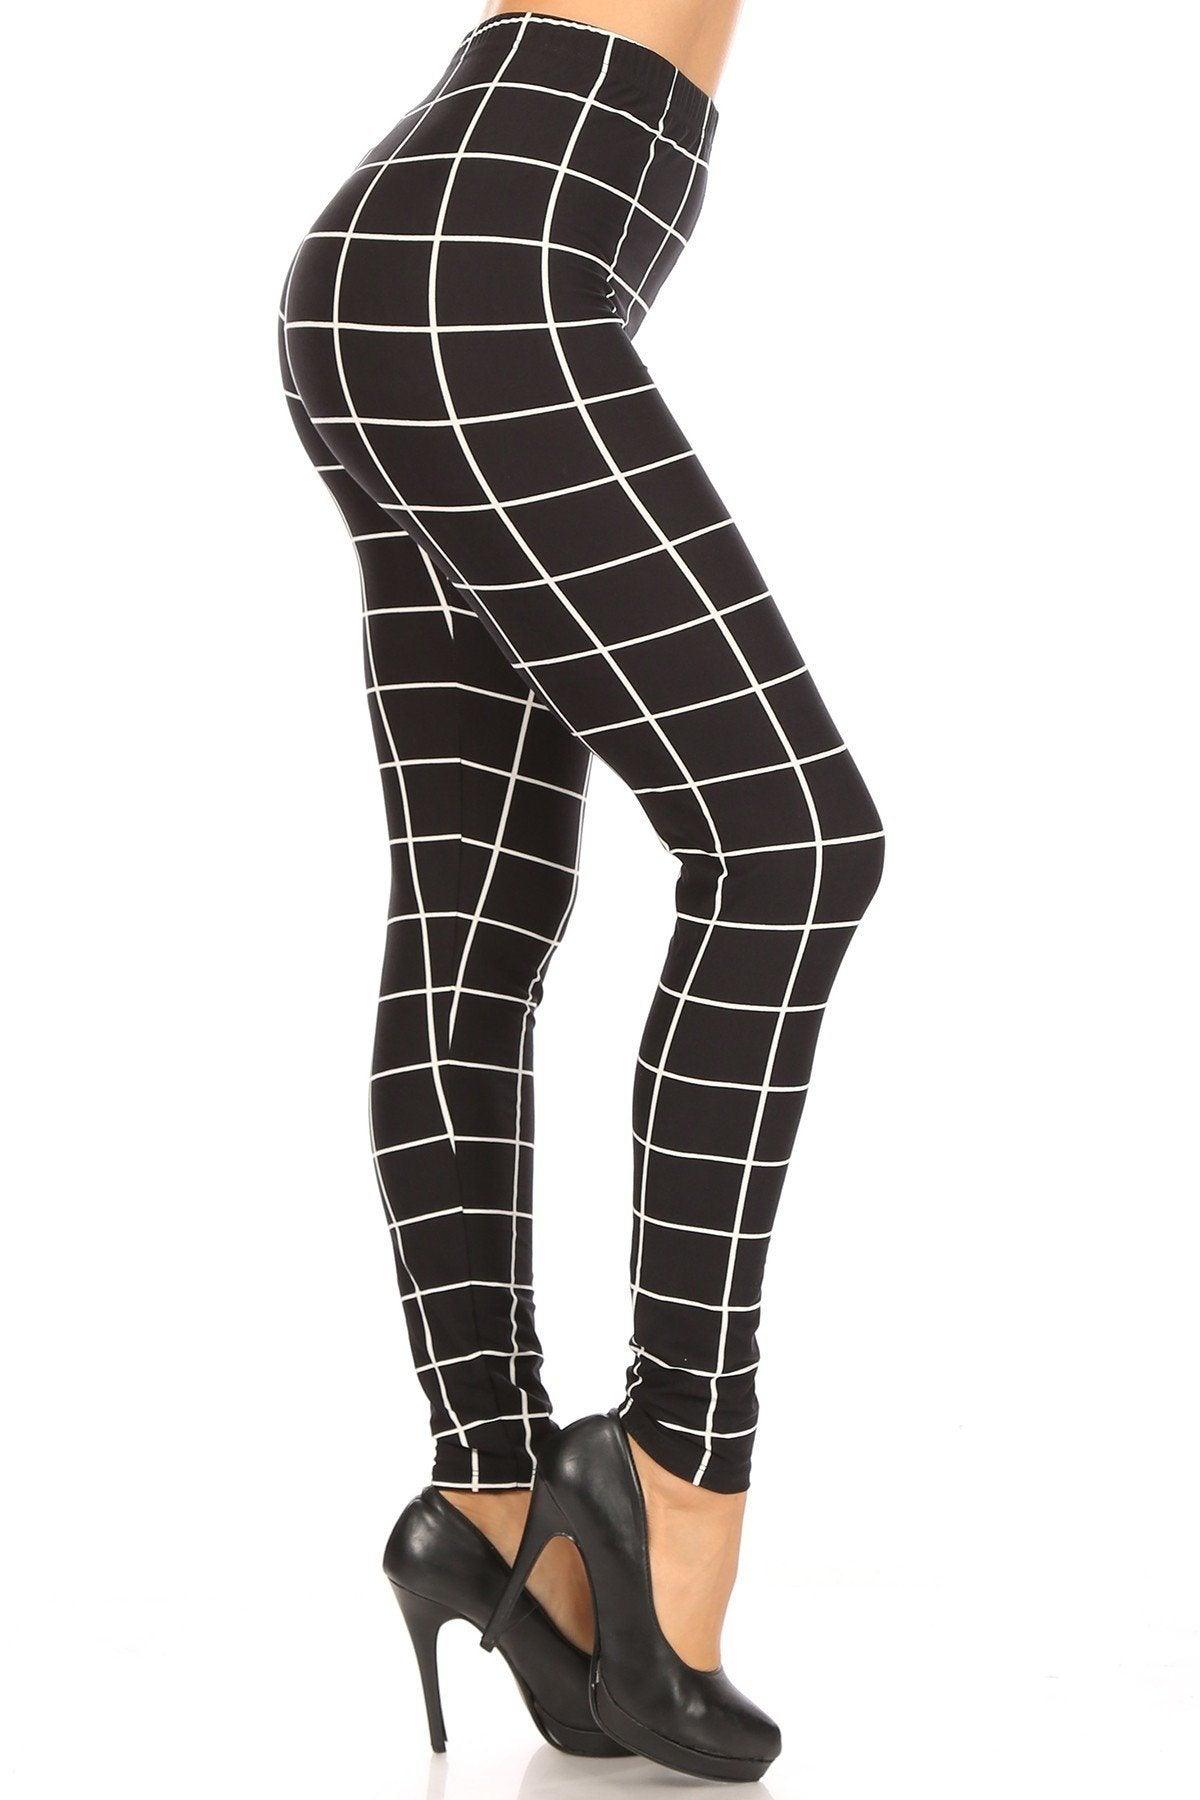 Plaid High Waisted Leggings With Elastic Waist And Skinny Fit Naughty Smile Fashion